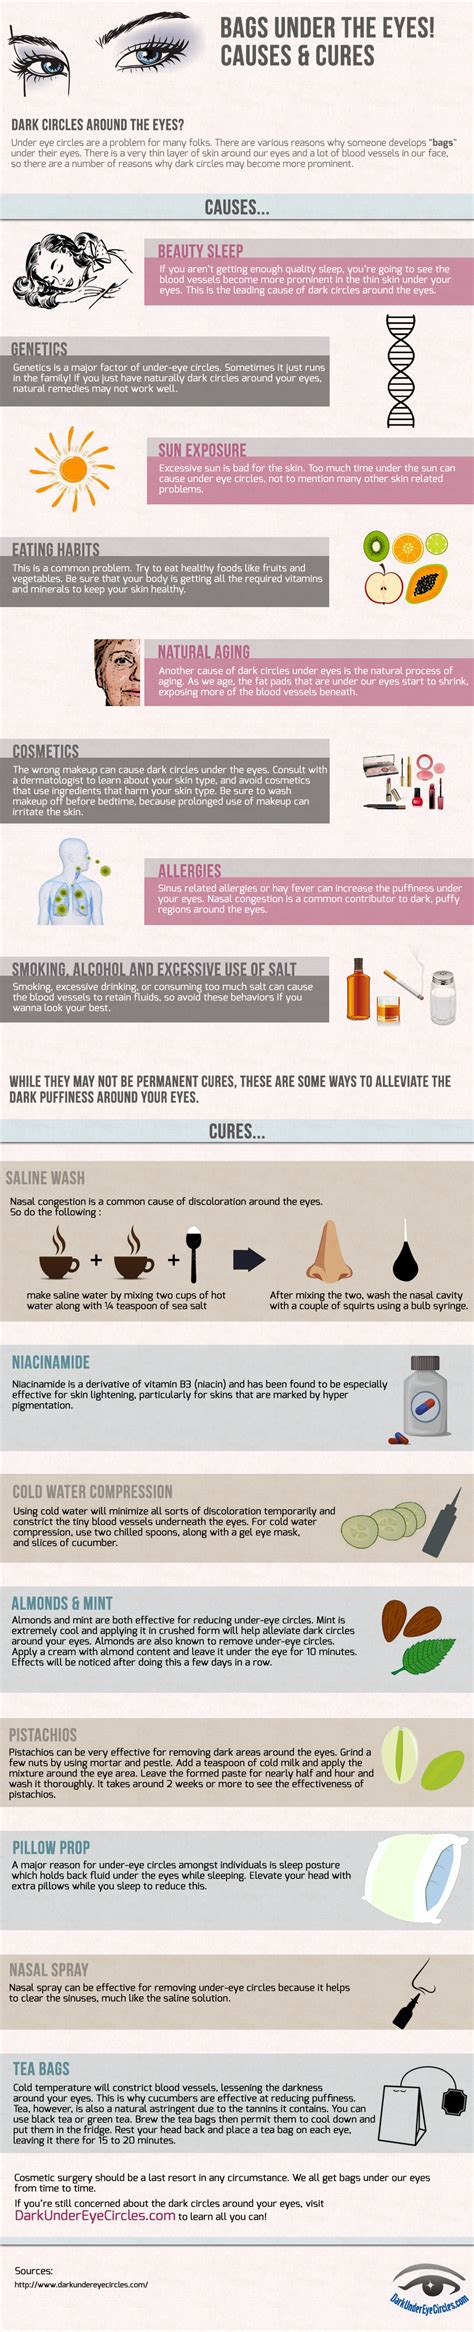 Dark Circles Under Eyes Common Causes And Cures Infographic